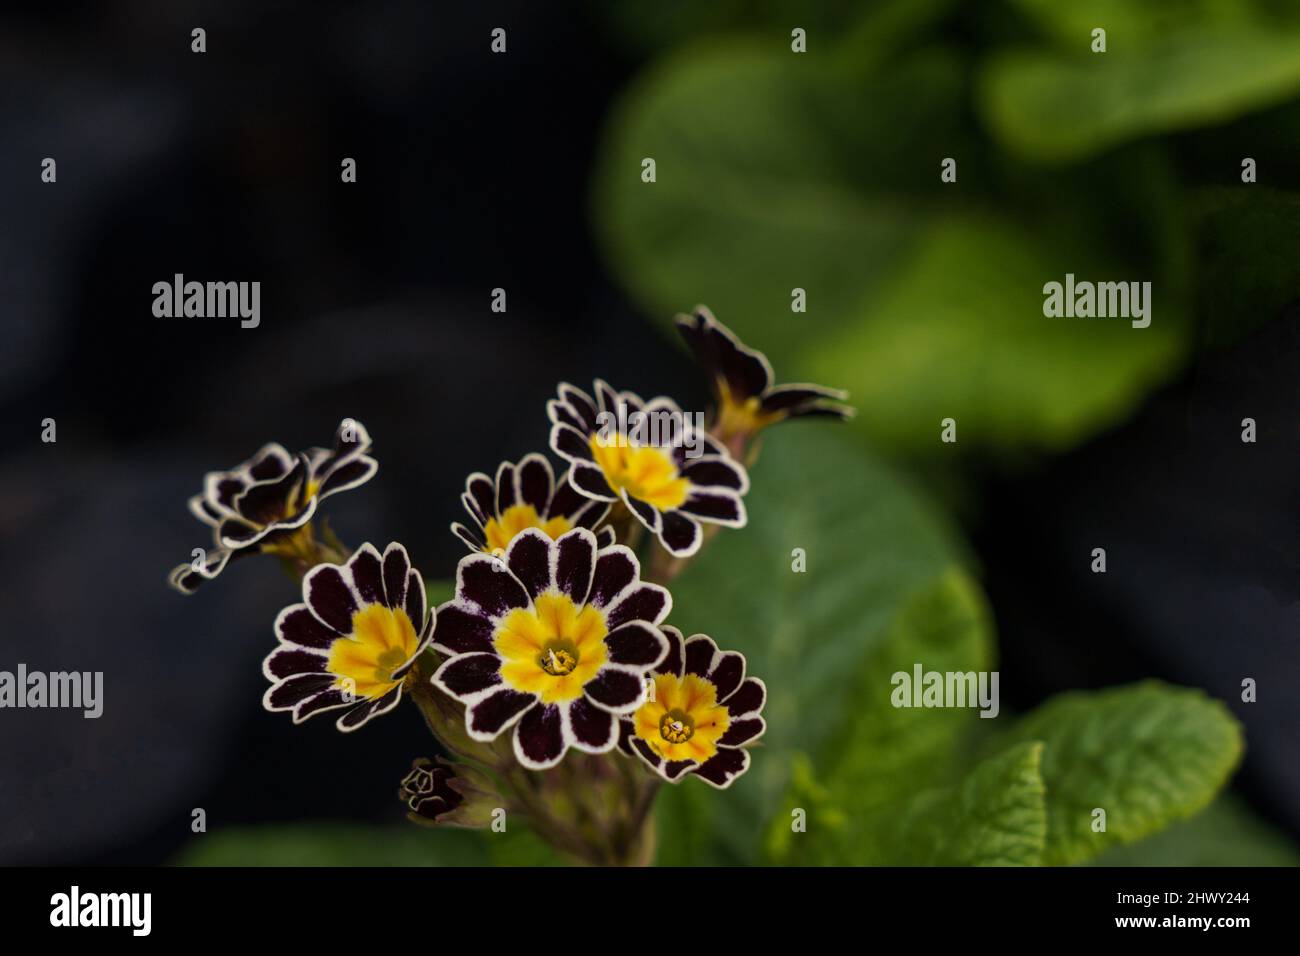 Primula victoriana with dark petals and bright yellow centres, also known as Polyanthus silver lace. Stock Photo